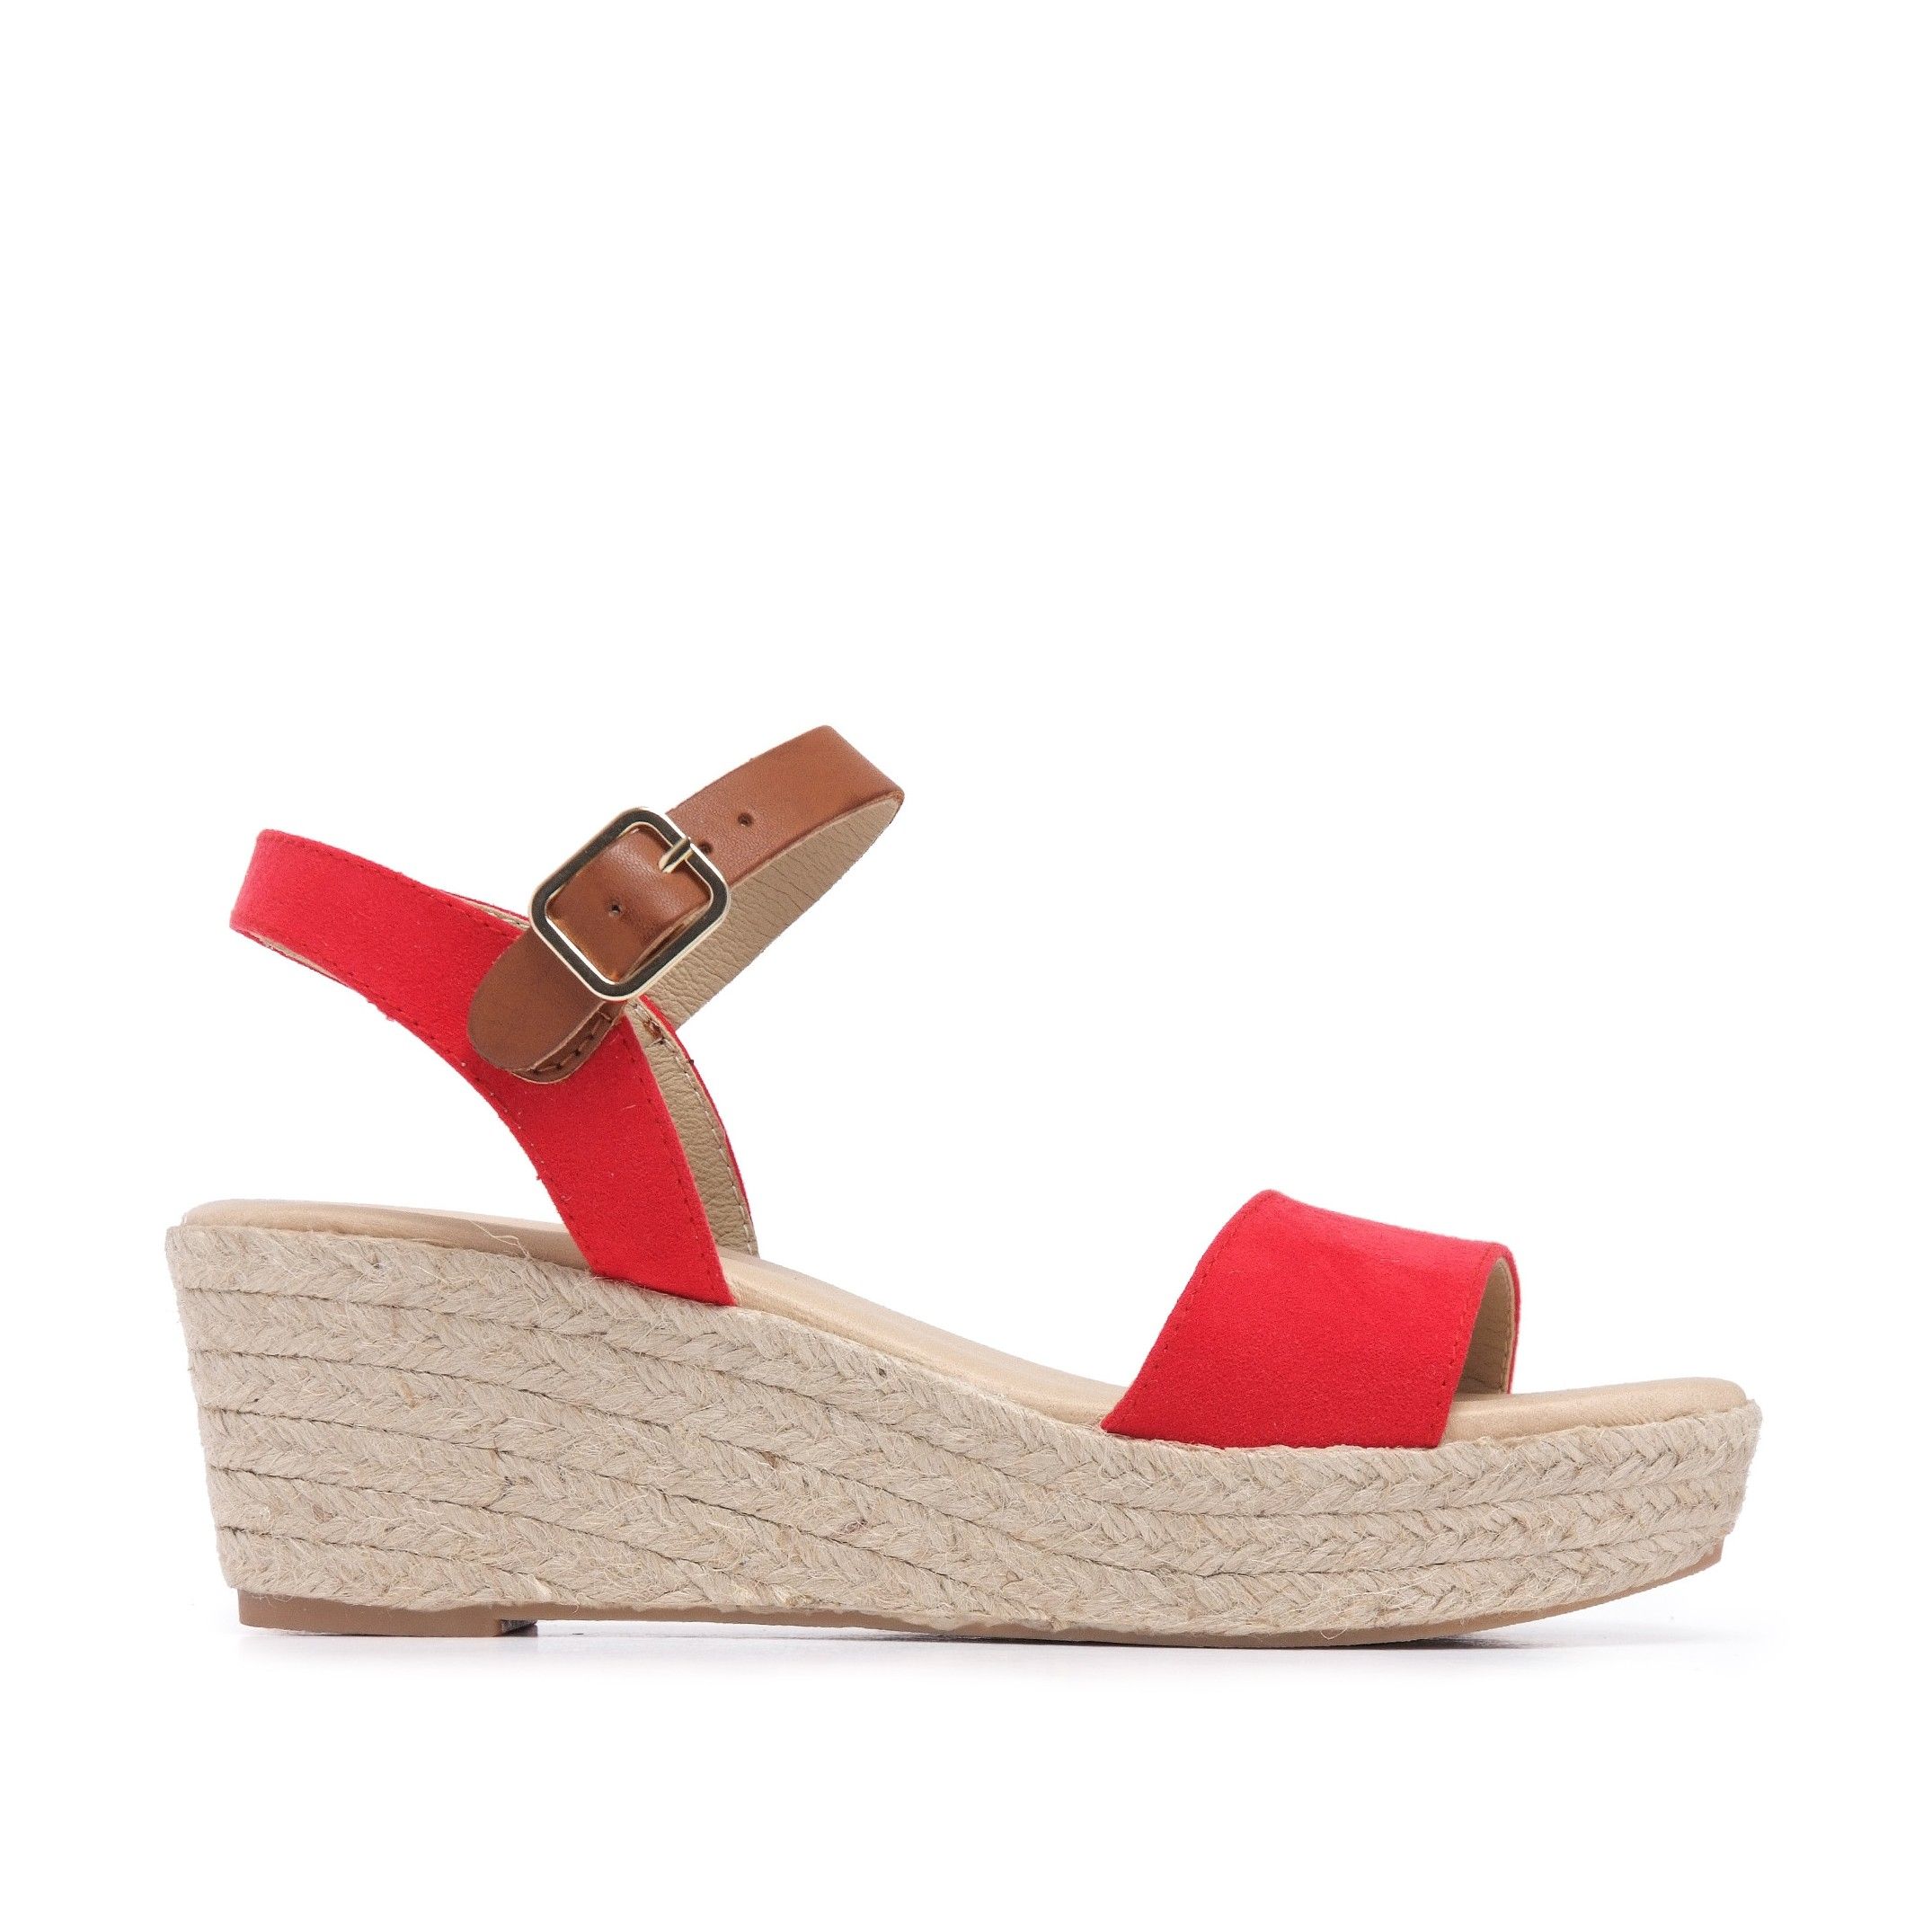 Jute and leather wedge sandal. Closure: metallic buckle at ankle height. Upper: leather and tissue. Insole: gel lined in leather. Wedge: 6 cm of jute. Platform: 2,5 cm. Sole:Non-skid rubber. MADE IN SPAIN.